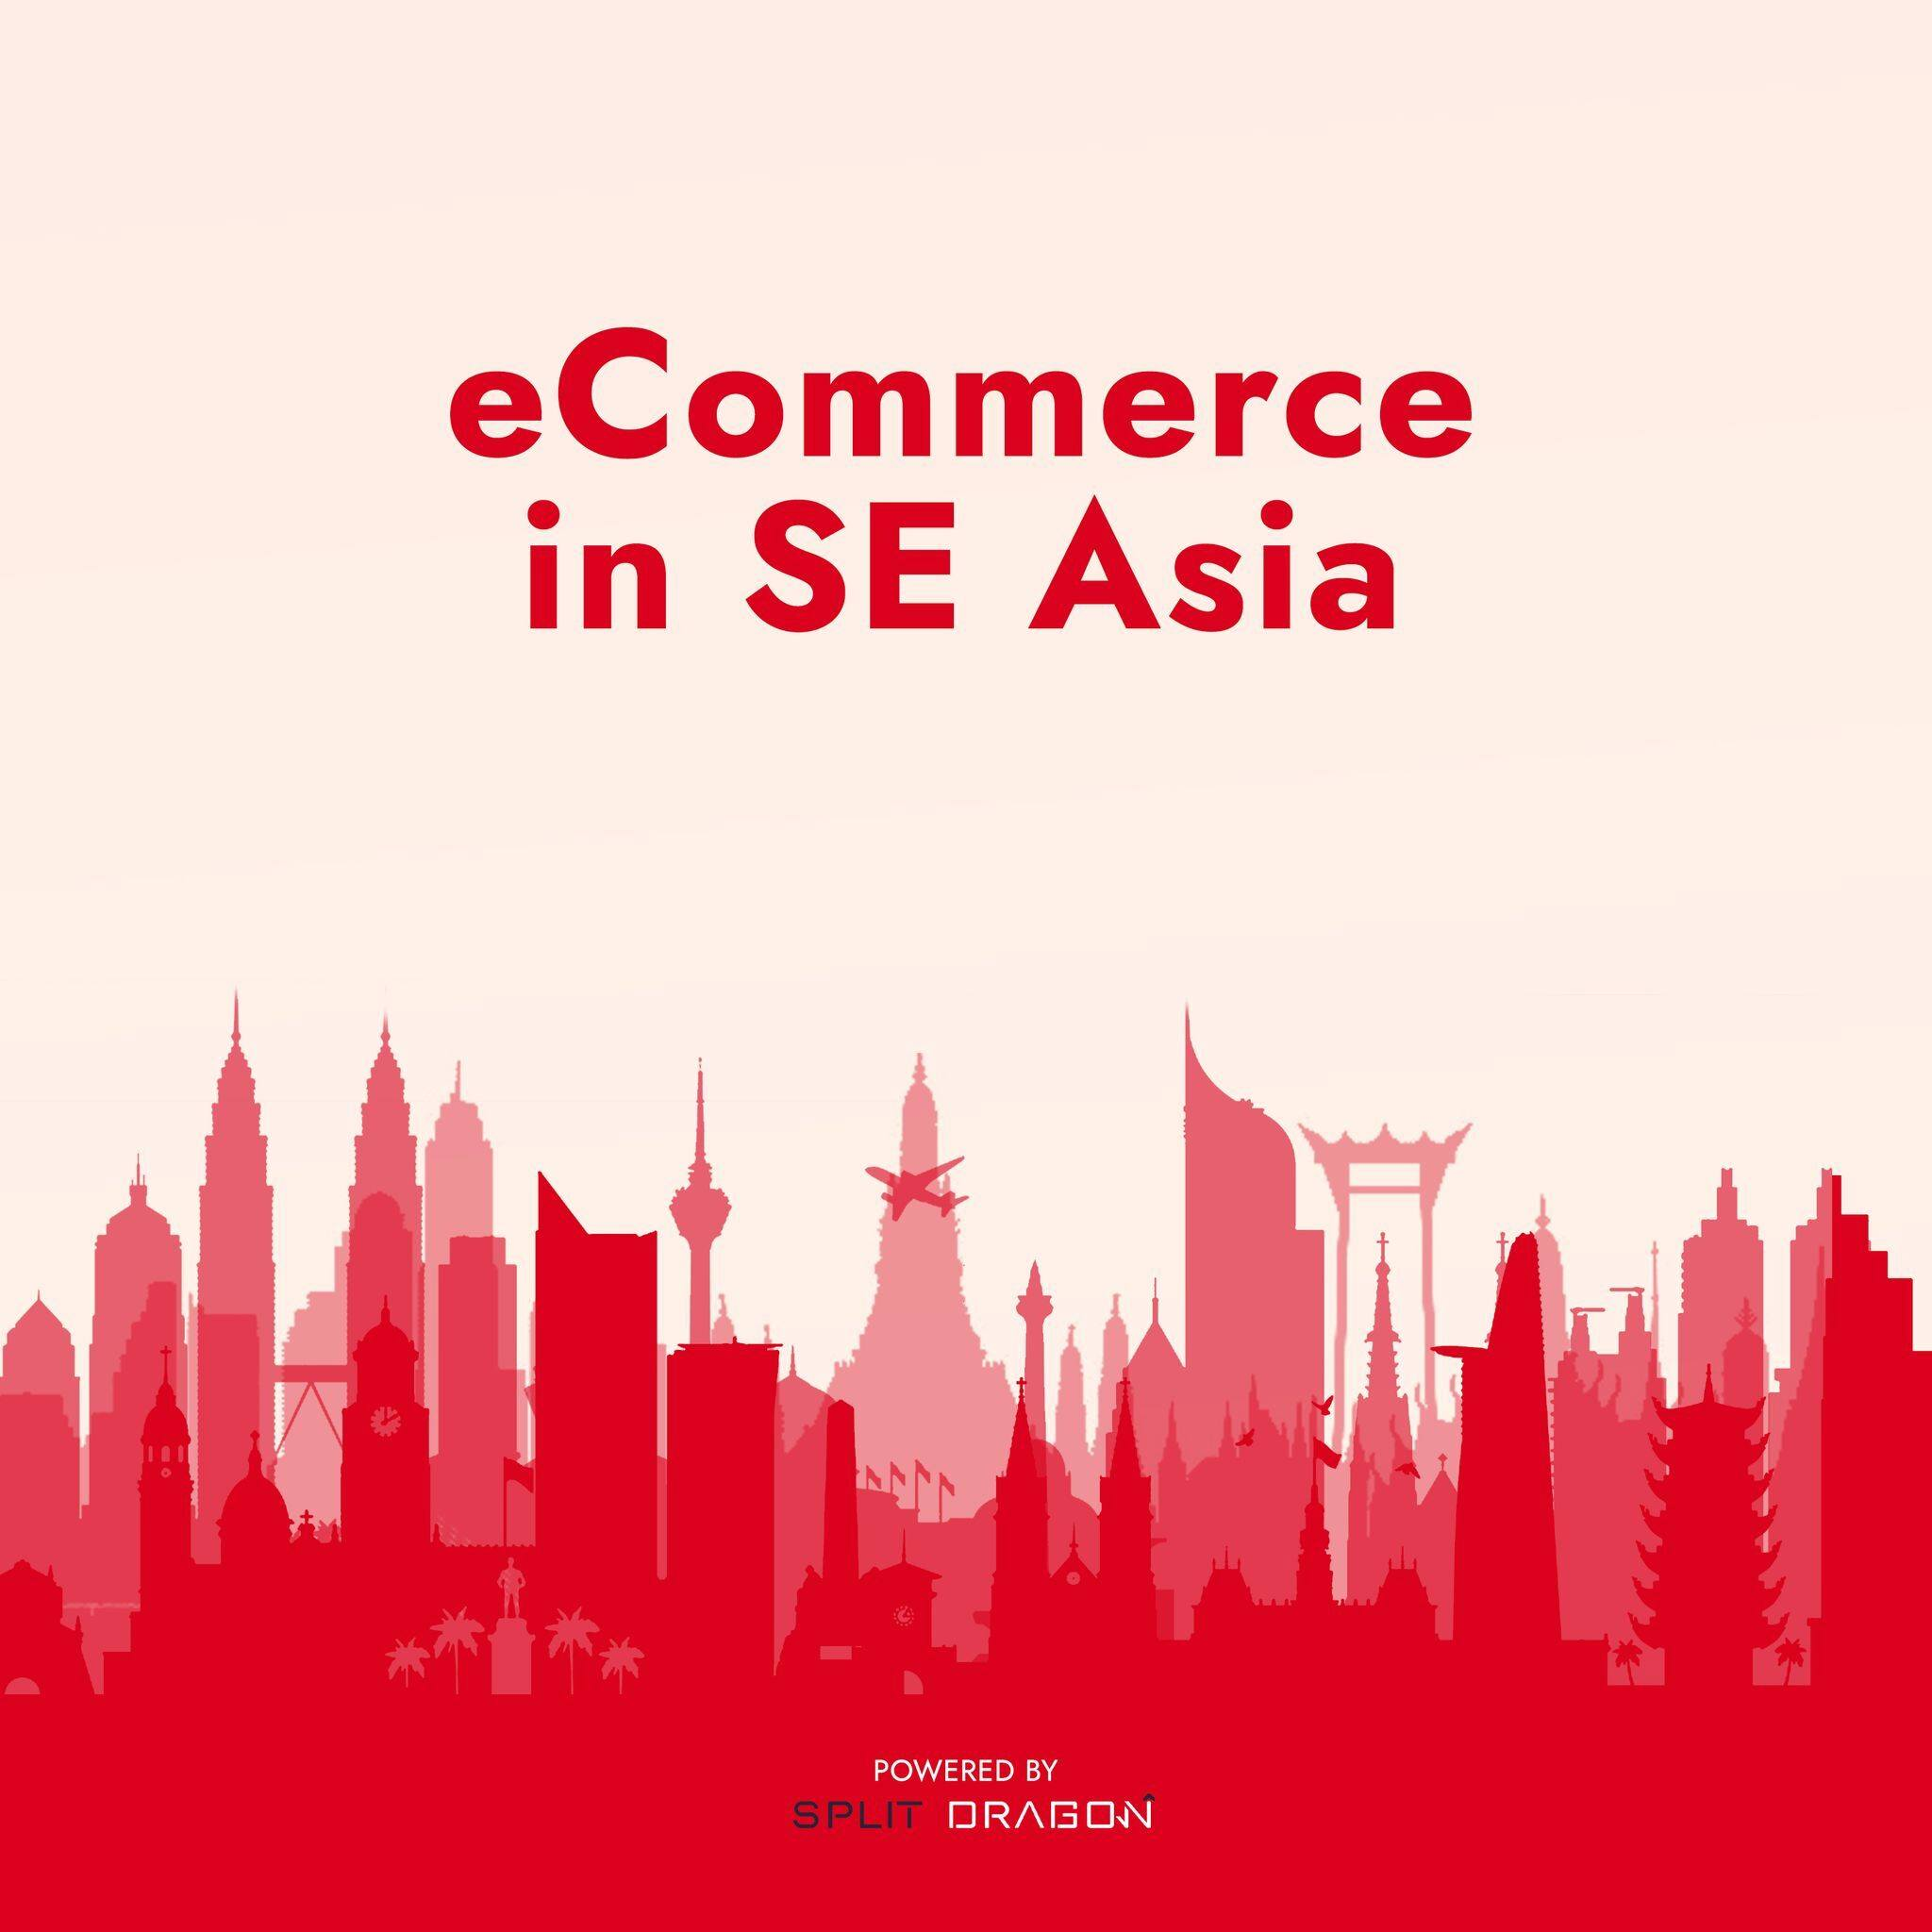 eCommerce in SE Asia